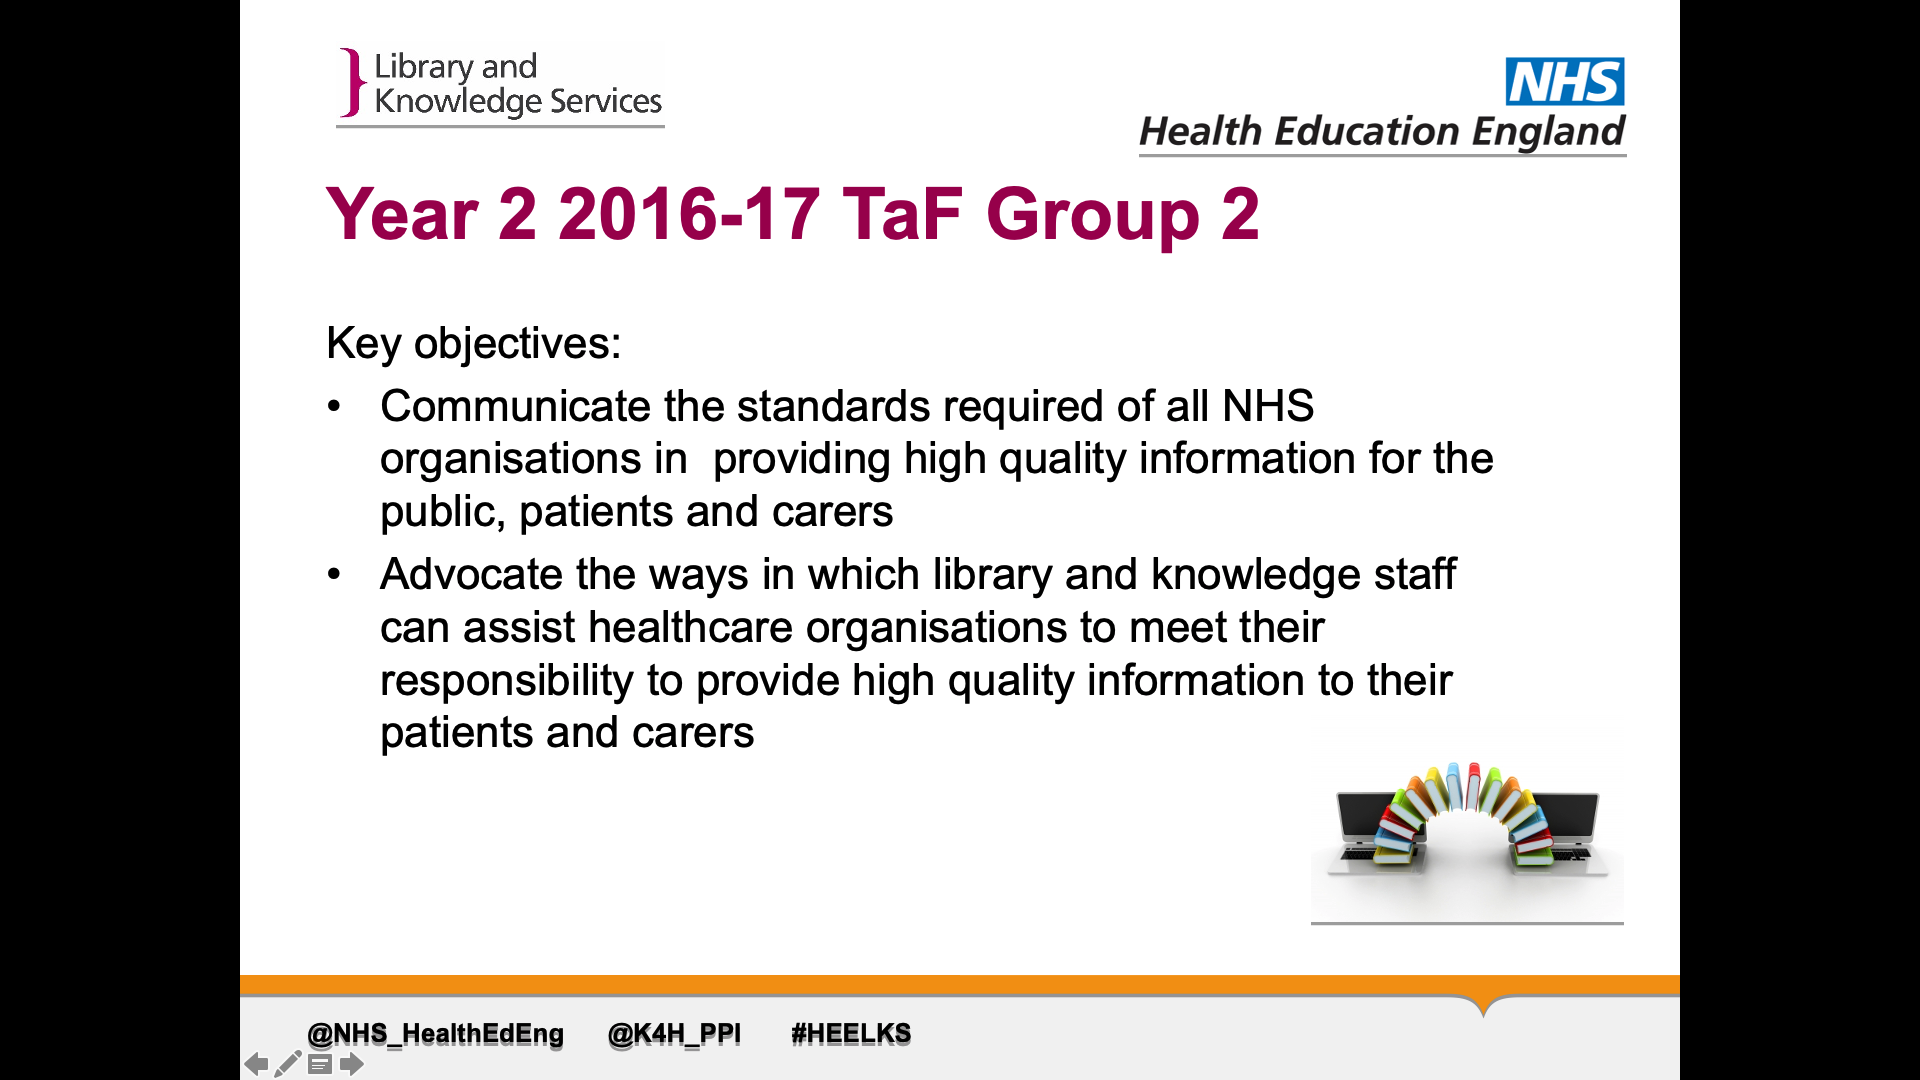 Title: Year 2 2016-17 TaF Group 2 Text on page: Key objectives: 1.  Communicate the standards required of all NHS organisations in providing high quality information for the public, patients and carers. 2. Advocate the ways in which library and knowledge staff can assist healthcare organisations to meet their responsibility to provide high quality information to their patients and carers